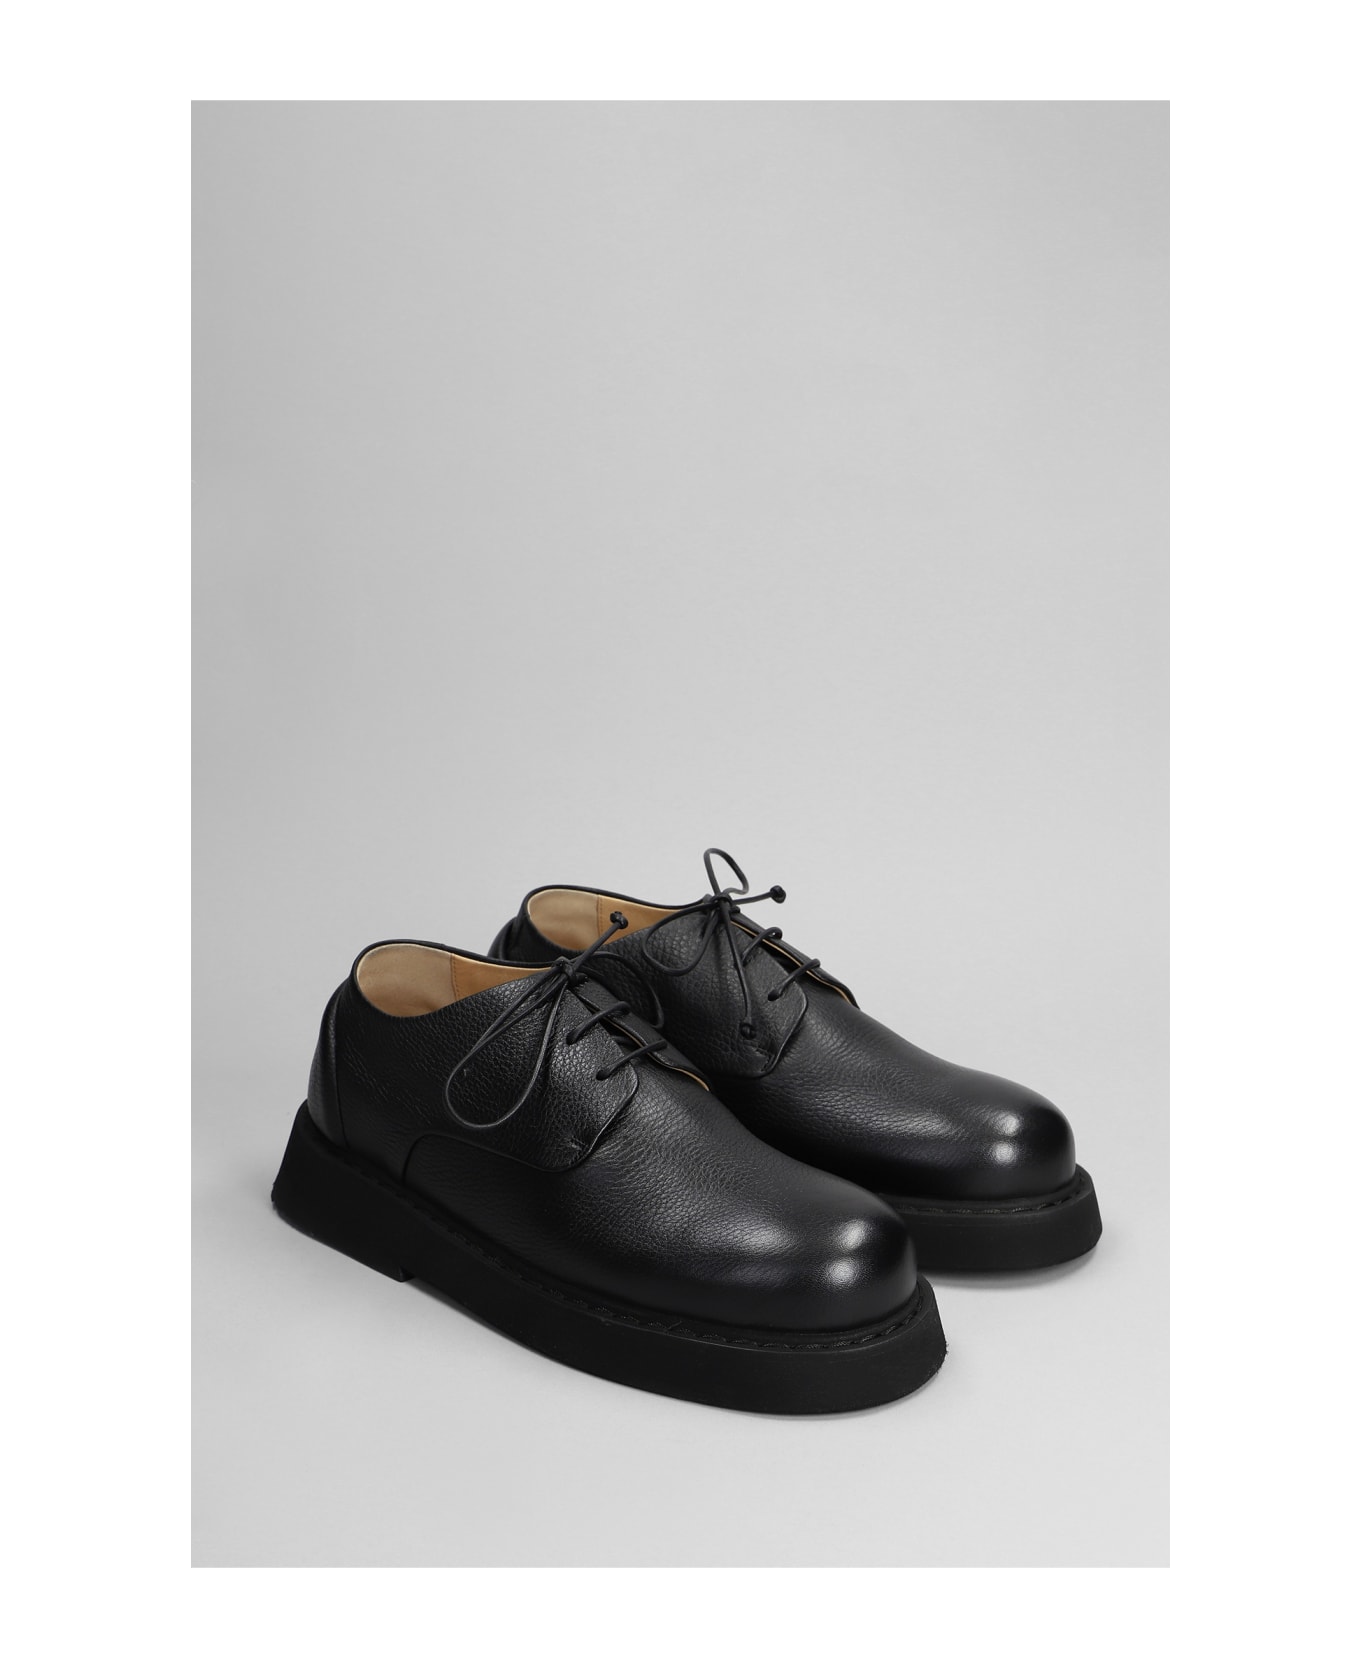 Marsell Lace Up Ascot Shoes In Black Leather - black